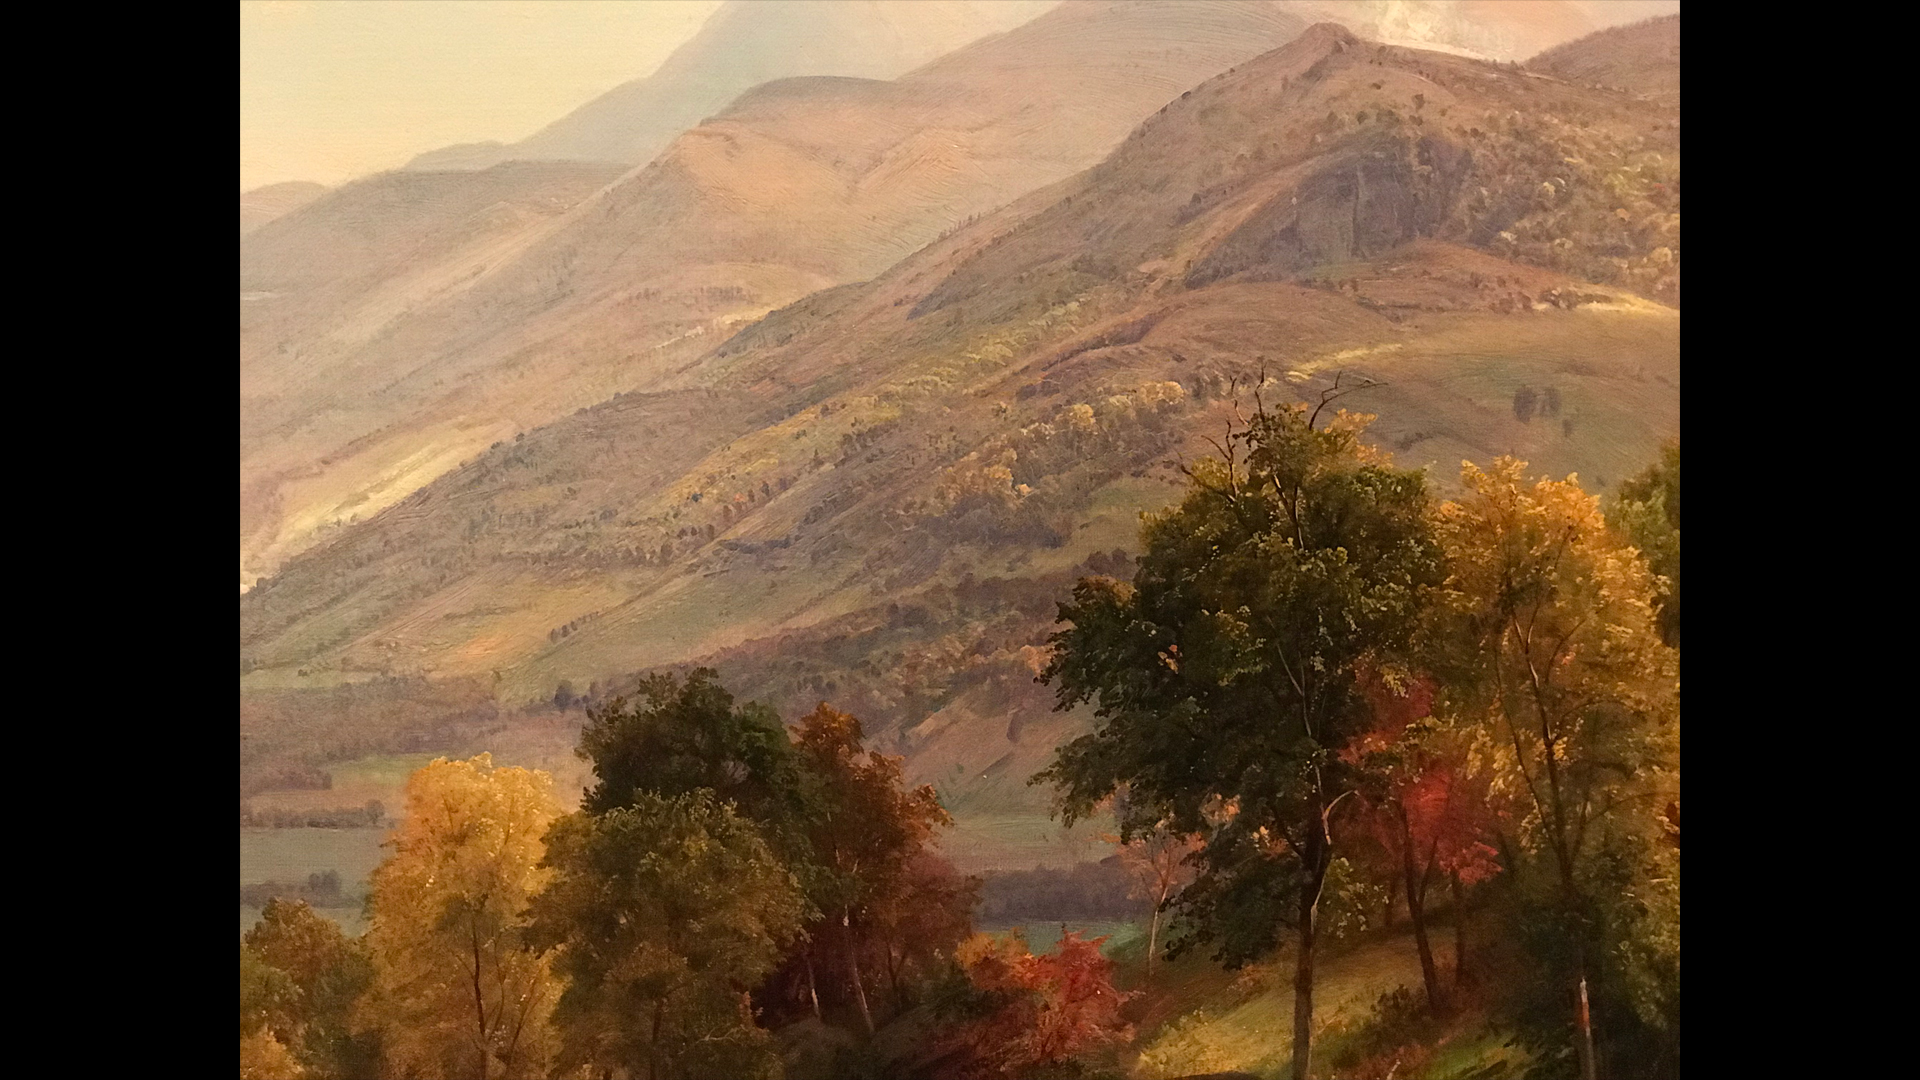 A painting showing the beautiful mountain landscape of the Adirondacks.